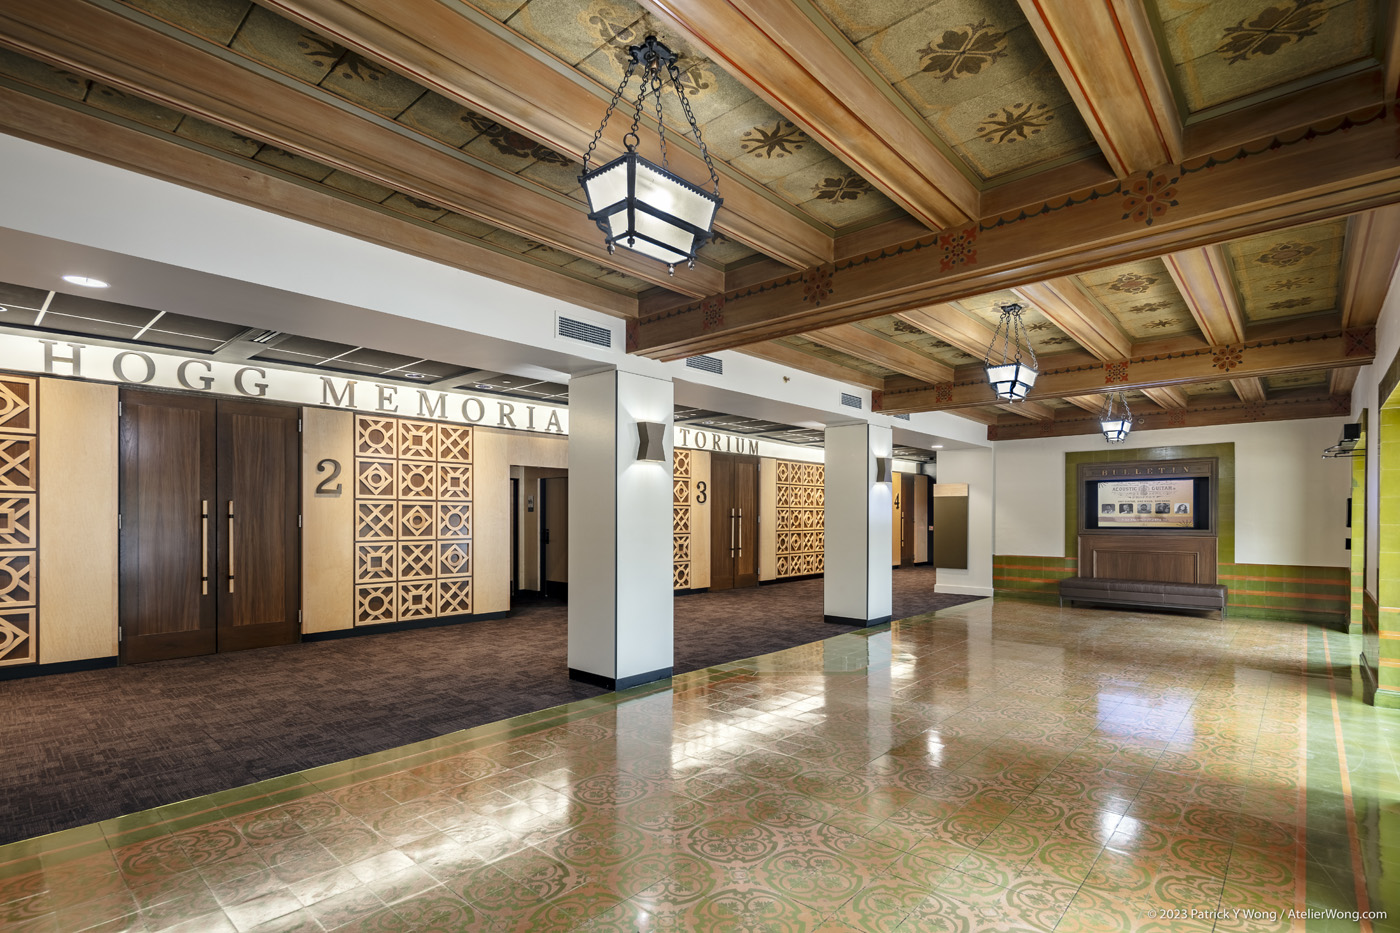 Lobby view showing restored tile floor and wood ceiling beams.